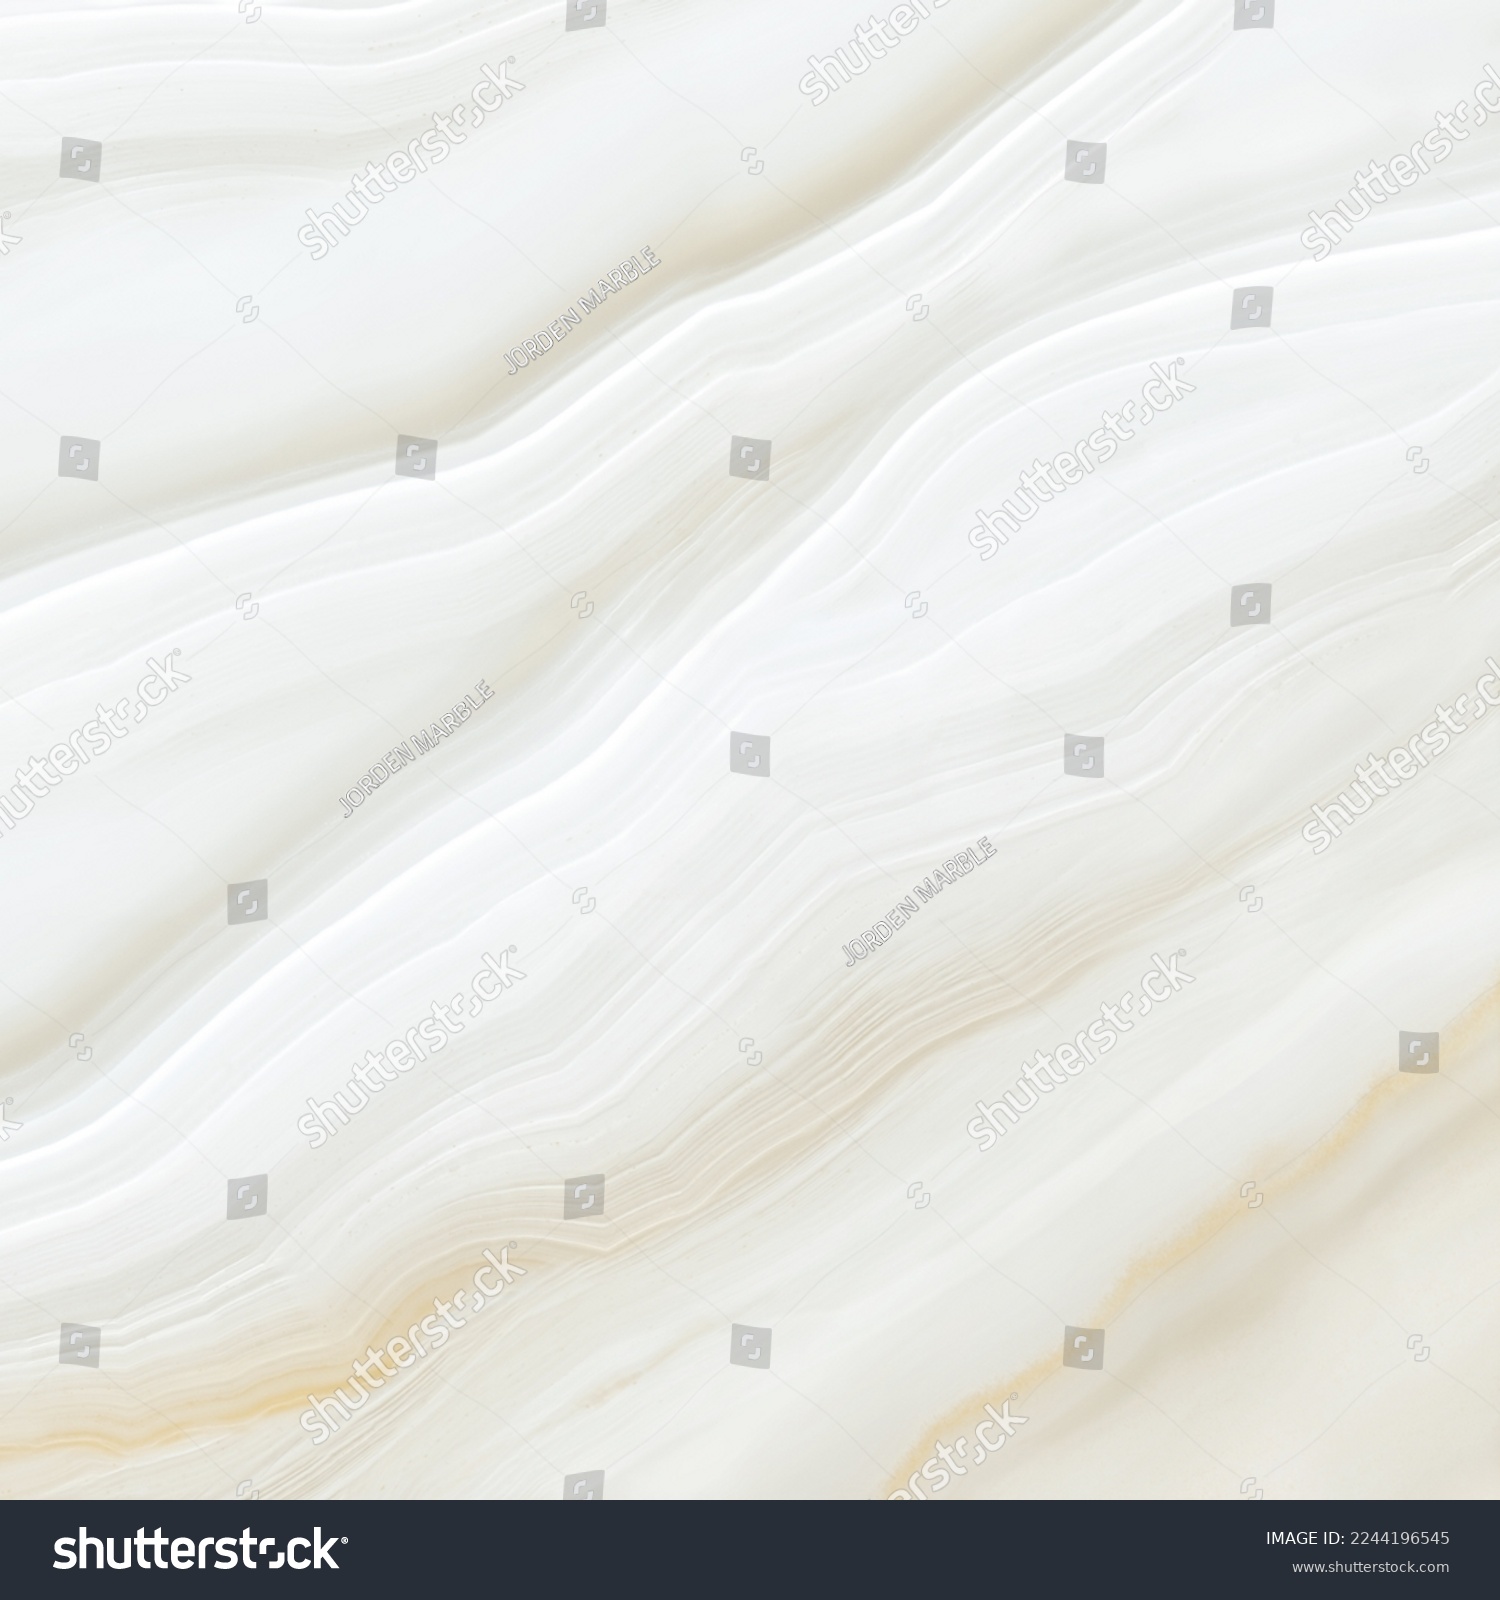 Light Onyx Marble Texture Background, Natural Polished Smooth Onyx Marble Stone For Interior Abstract Home Decoration Used Ceramic Wall Tiles And Floor Tiles Surface, New Slab Marble. #2244196545